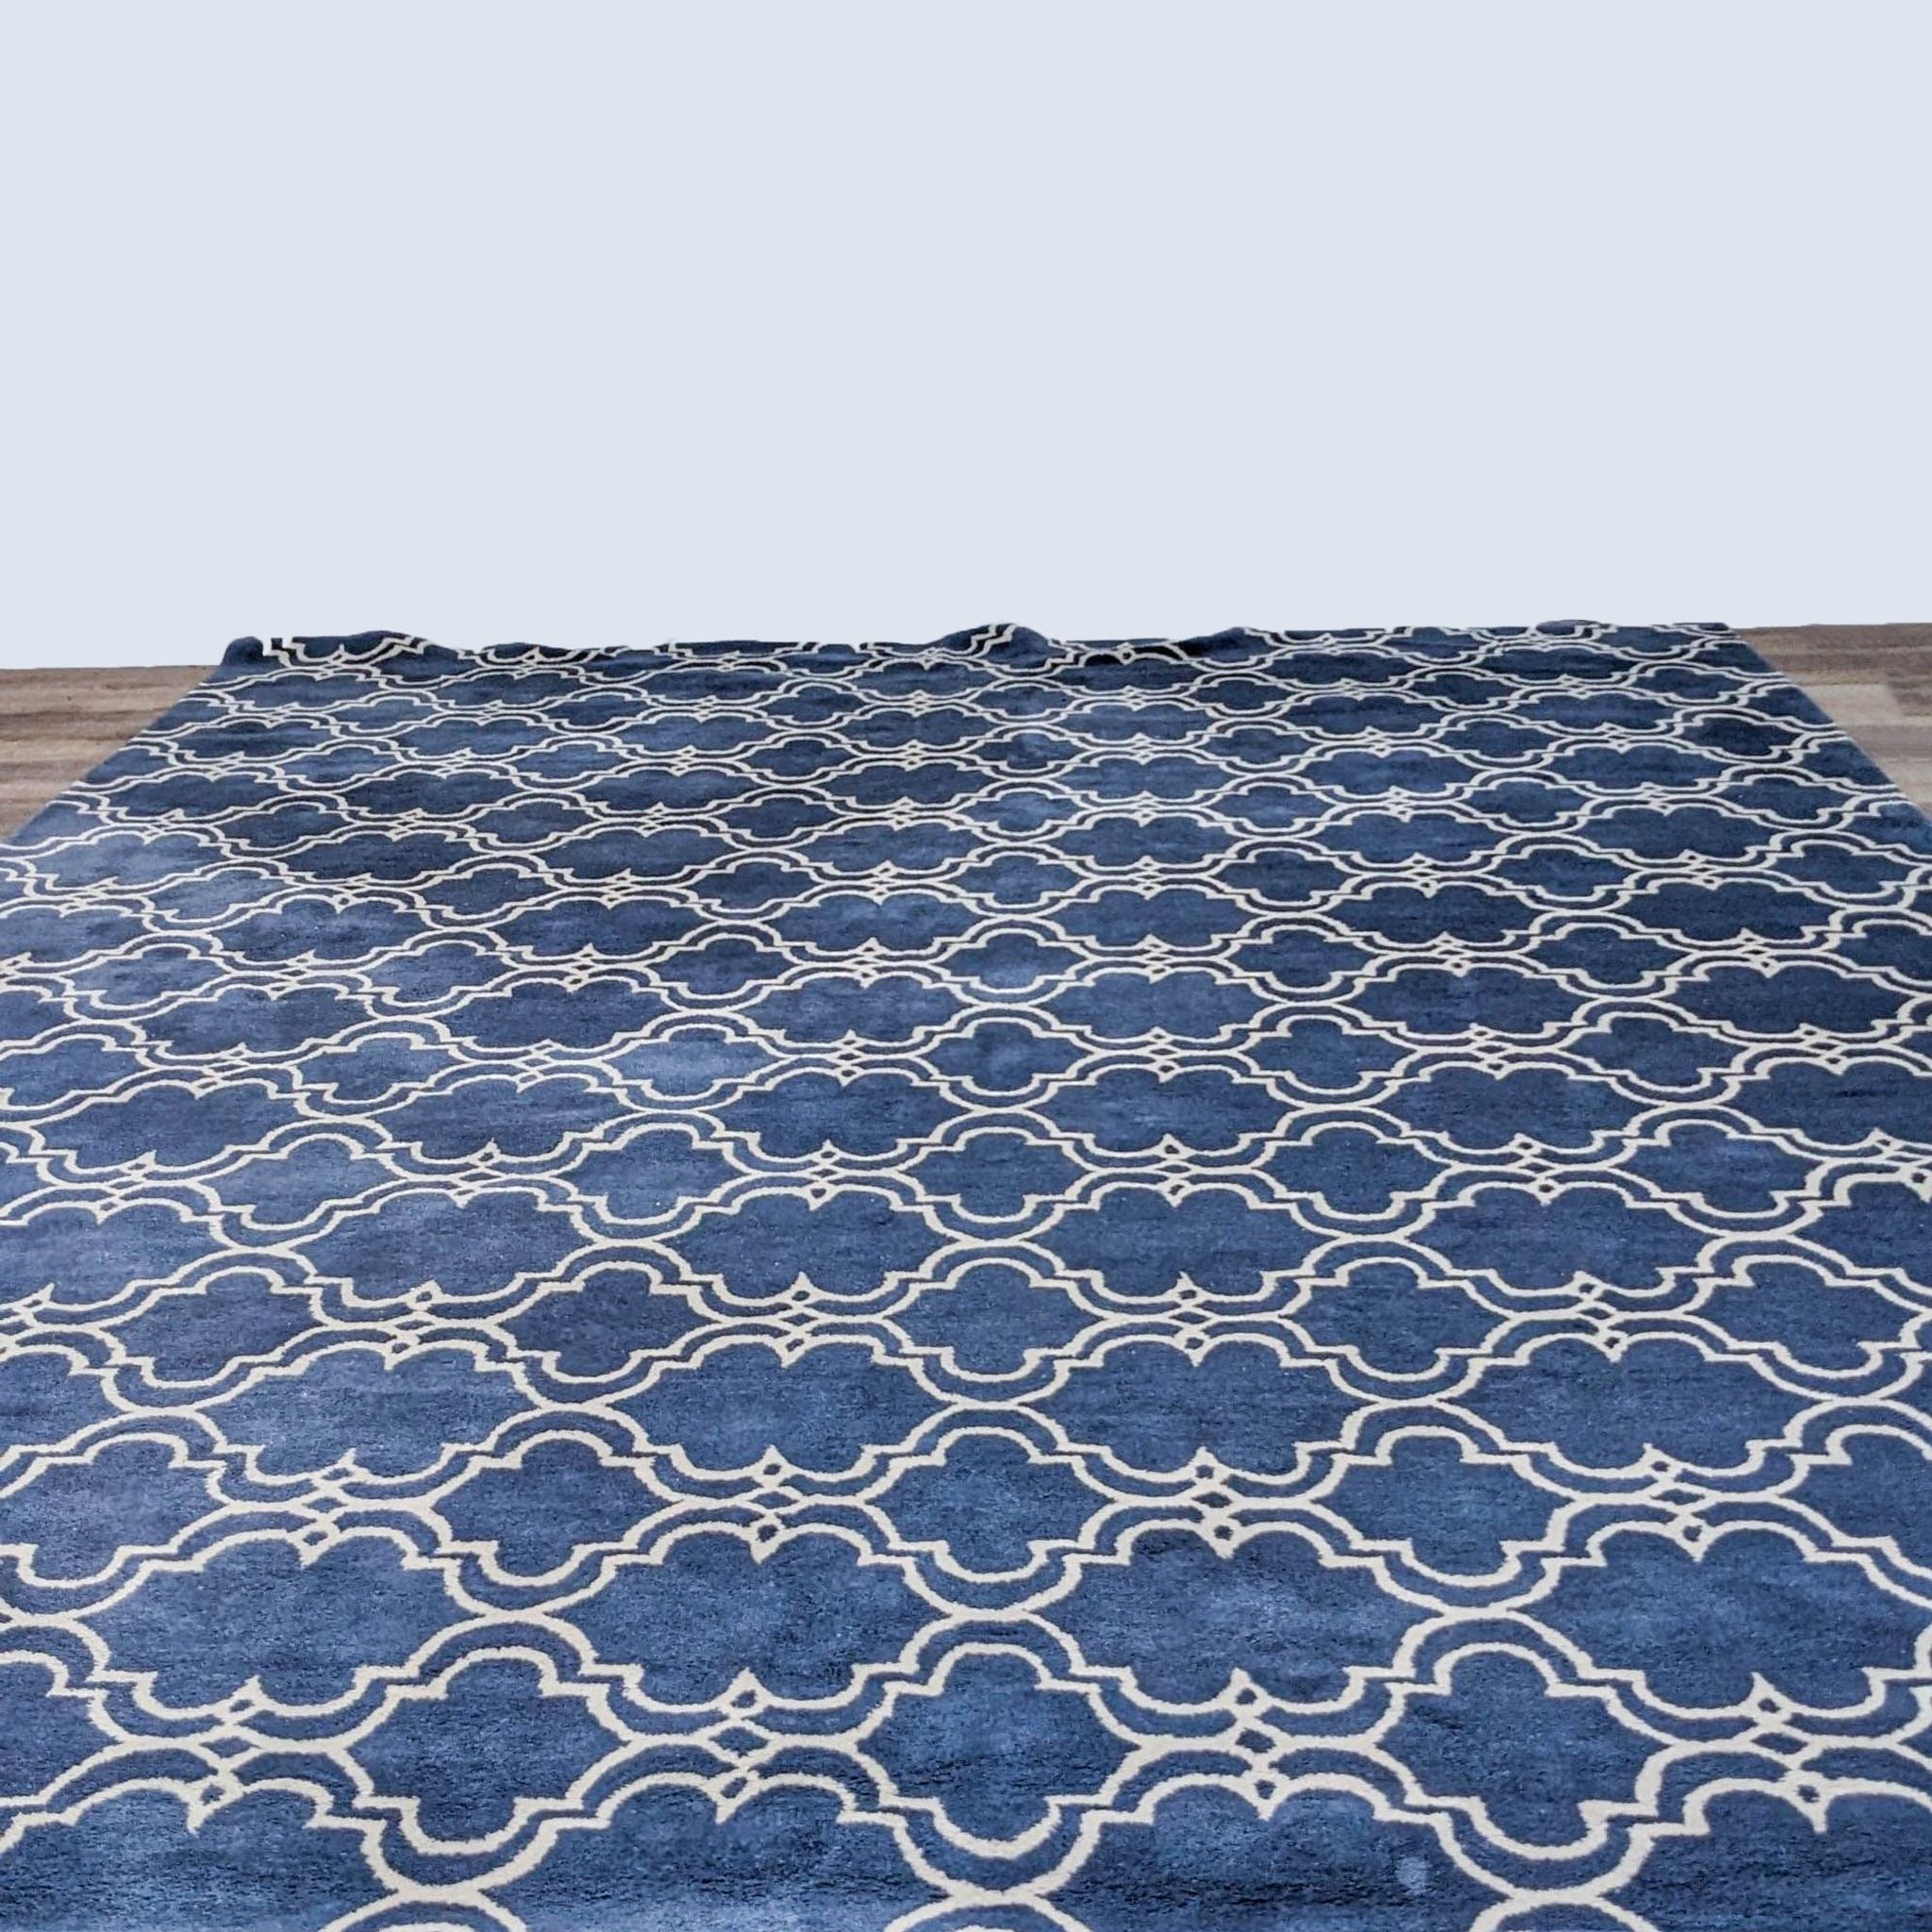 Pottery Barn blue and white patterned rug on wooden floor.